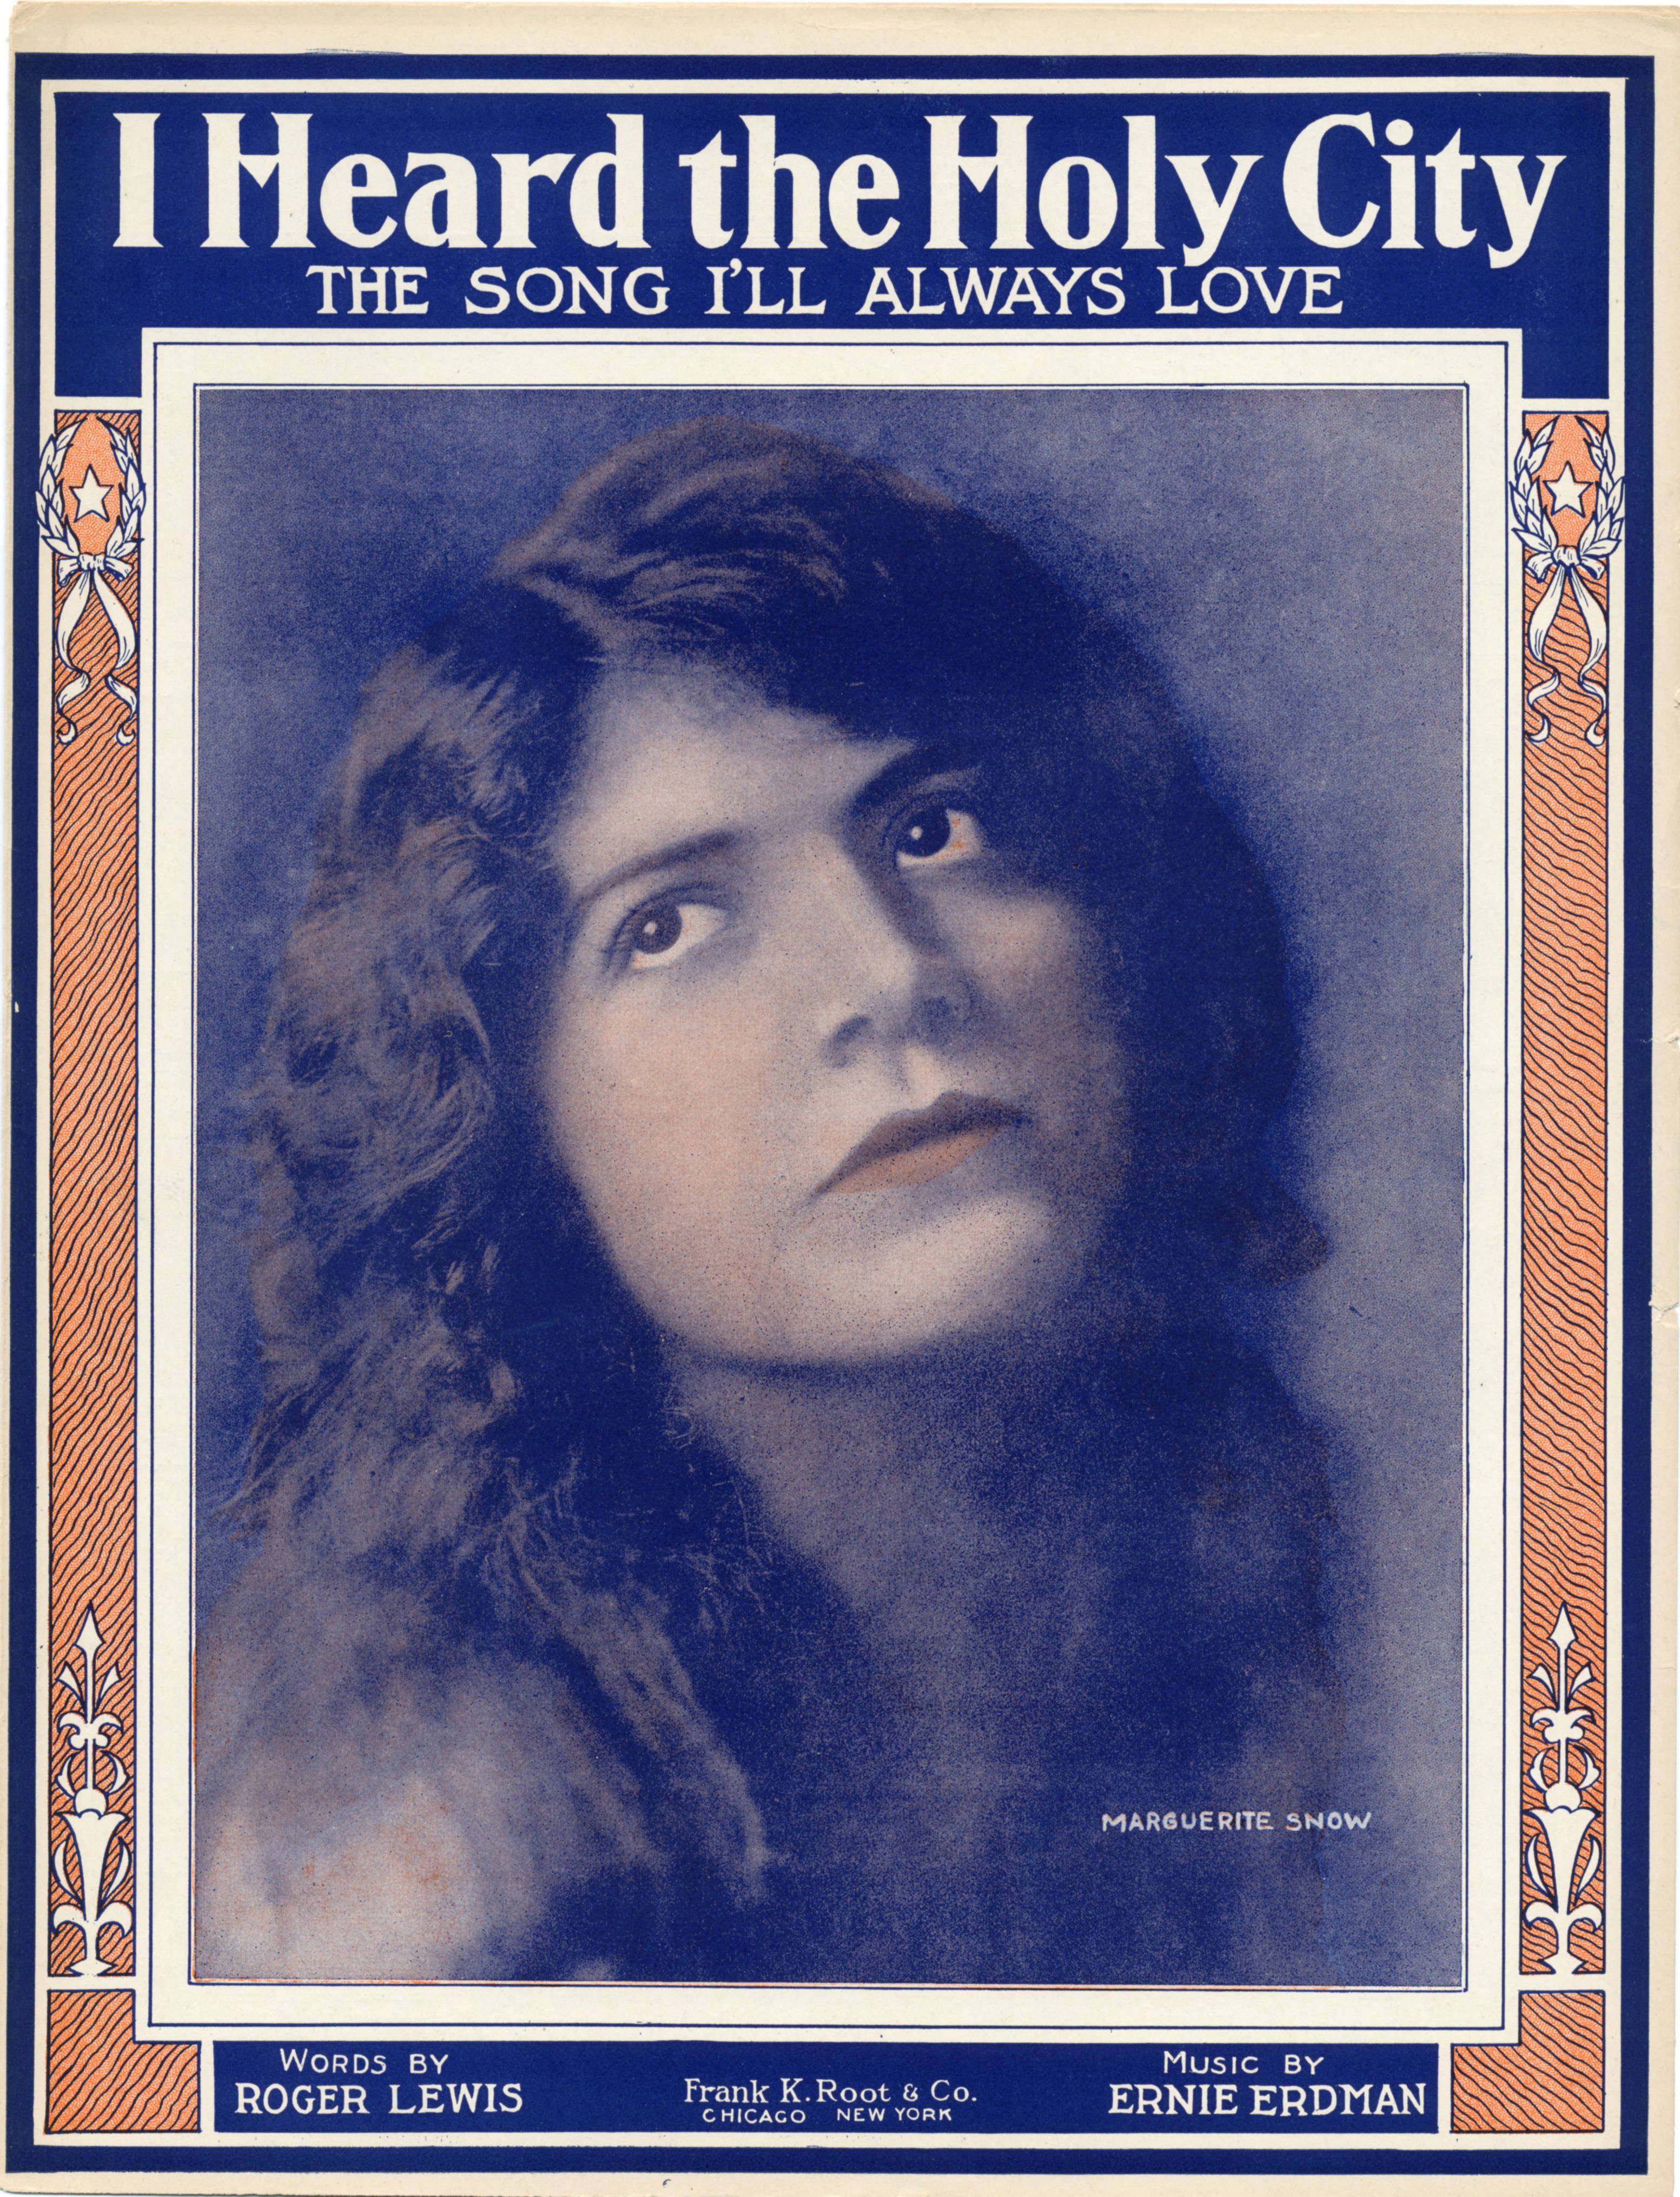 Sheet music cover - I HEARD THE HOLY CITY - THE SONG I'LL ALWAYS LOVE (1915)